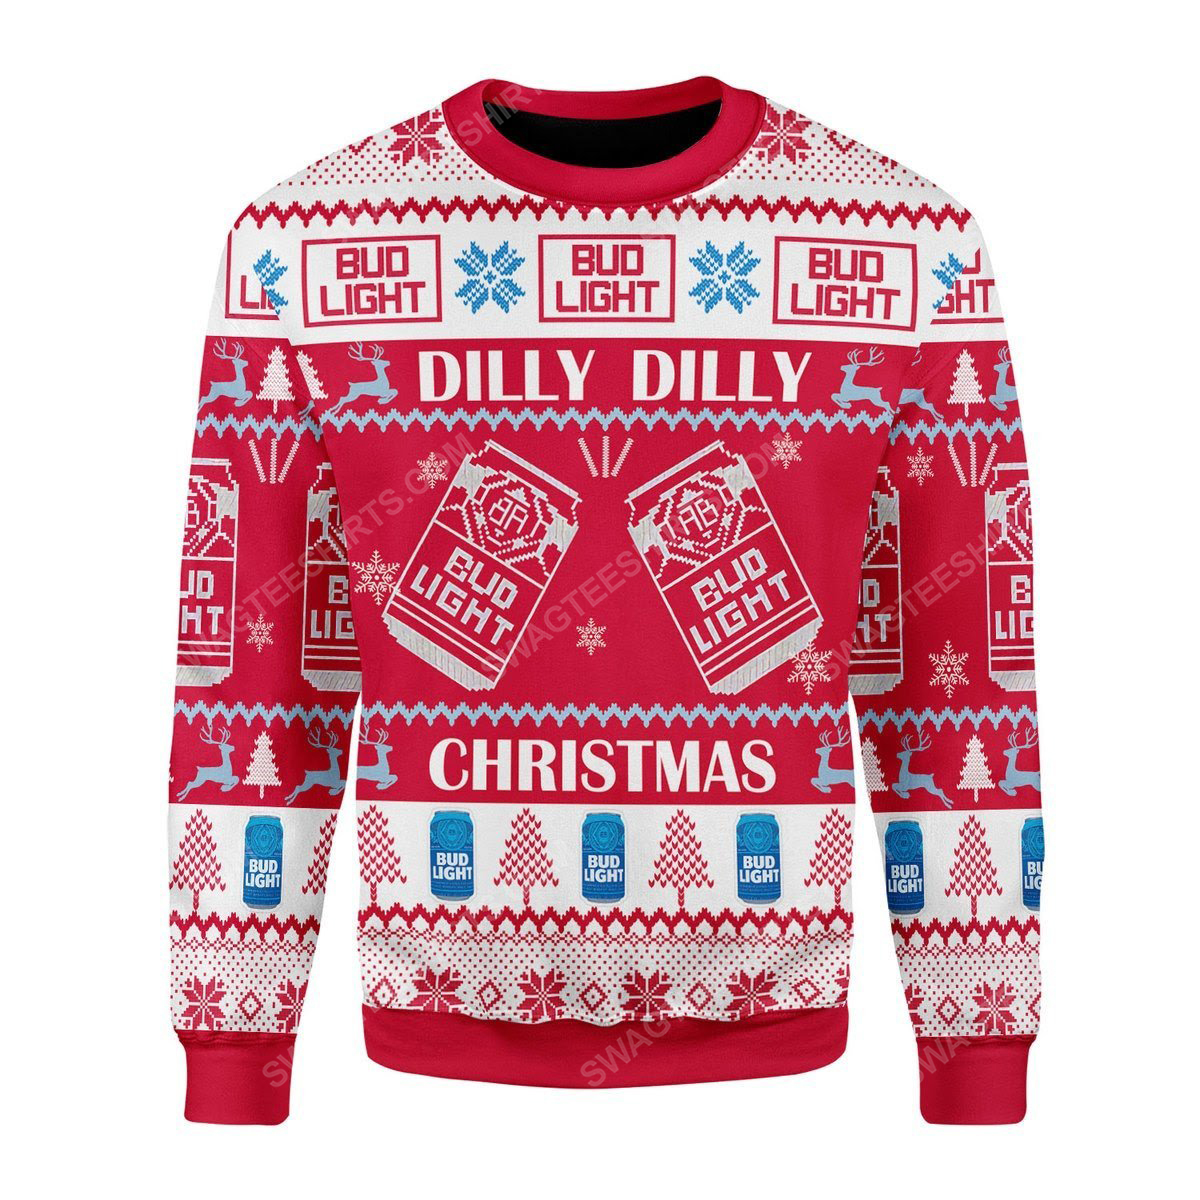 [special edition] Christmas party dilly dilly bud light ugly christmas sweater – maria